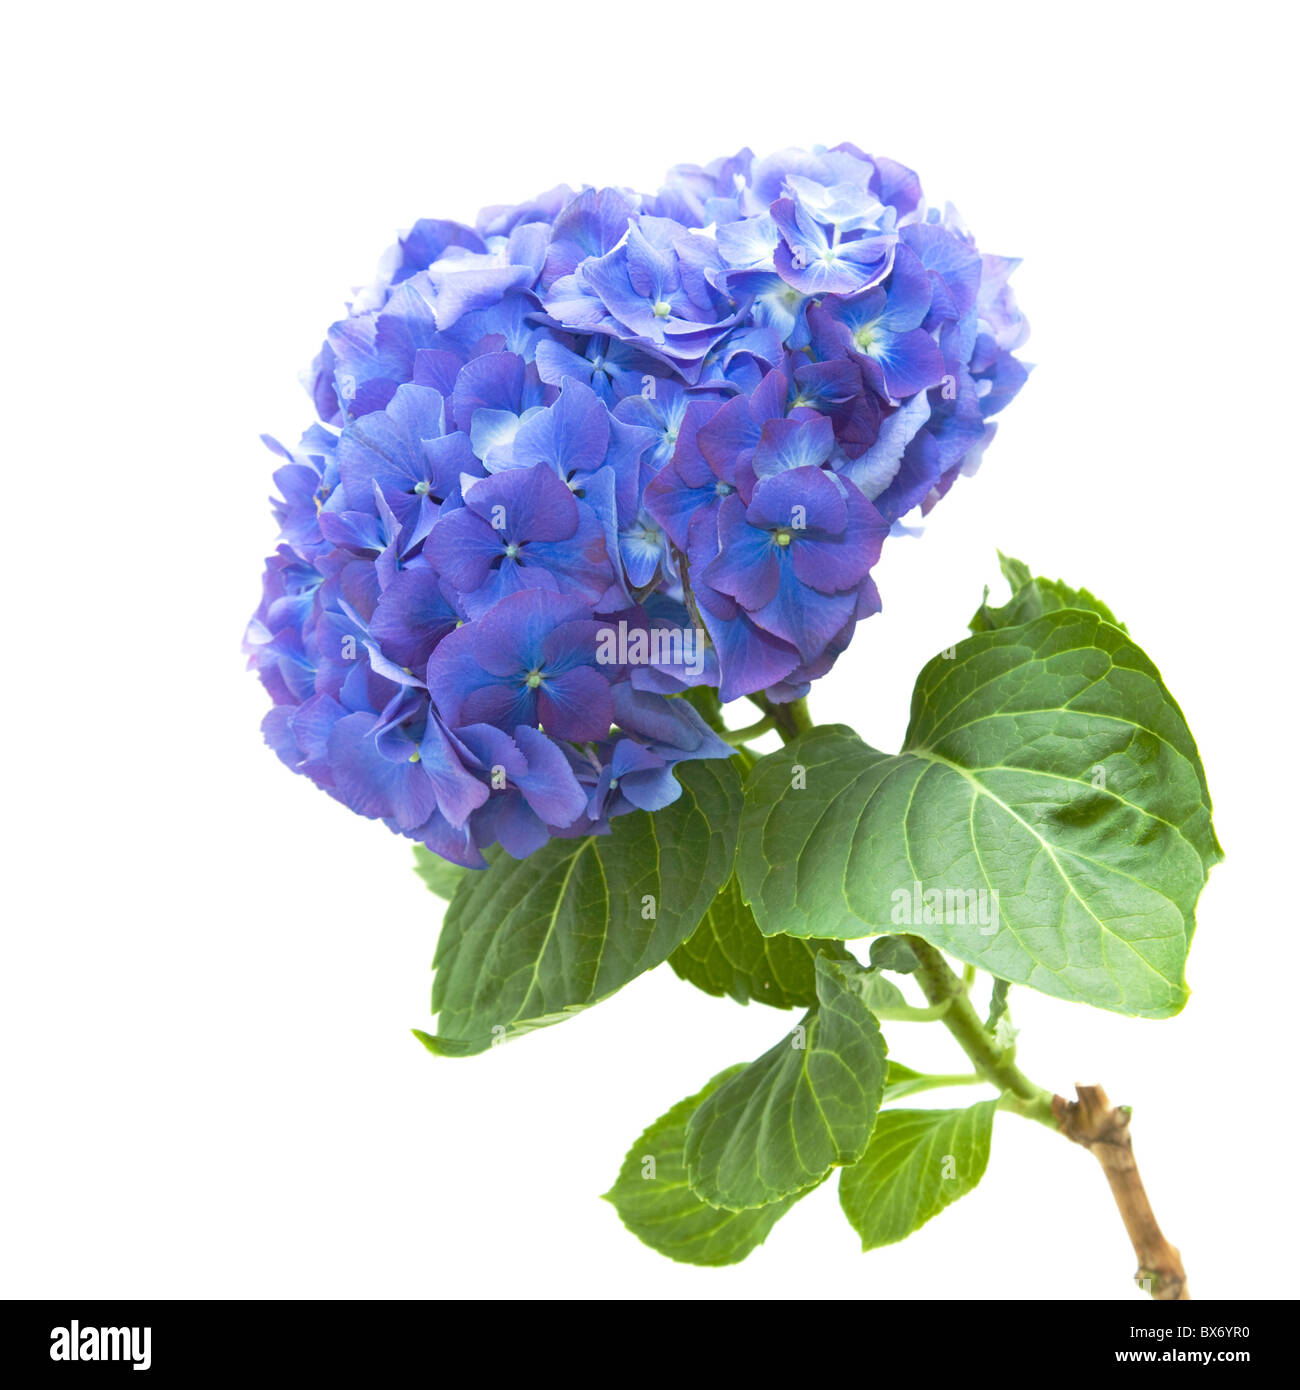 bright blue-lilac hydrangea flowerhead; isolated on white background; Stock Photo